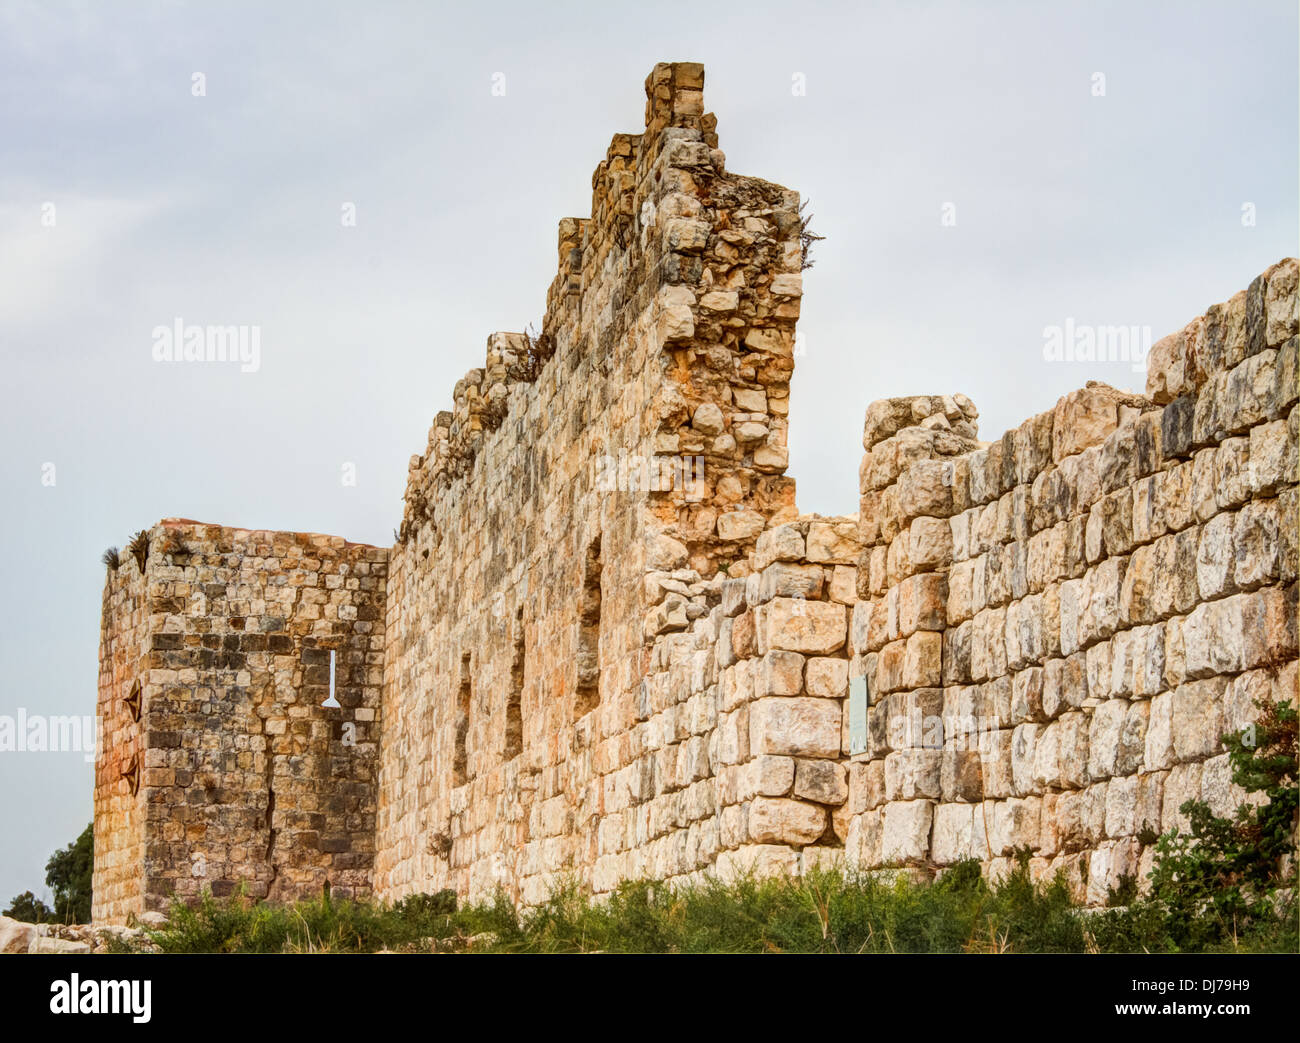 Antipatris fortress built by Herod the Great, located in Israel Stock Photo